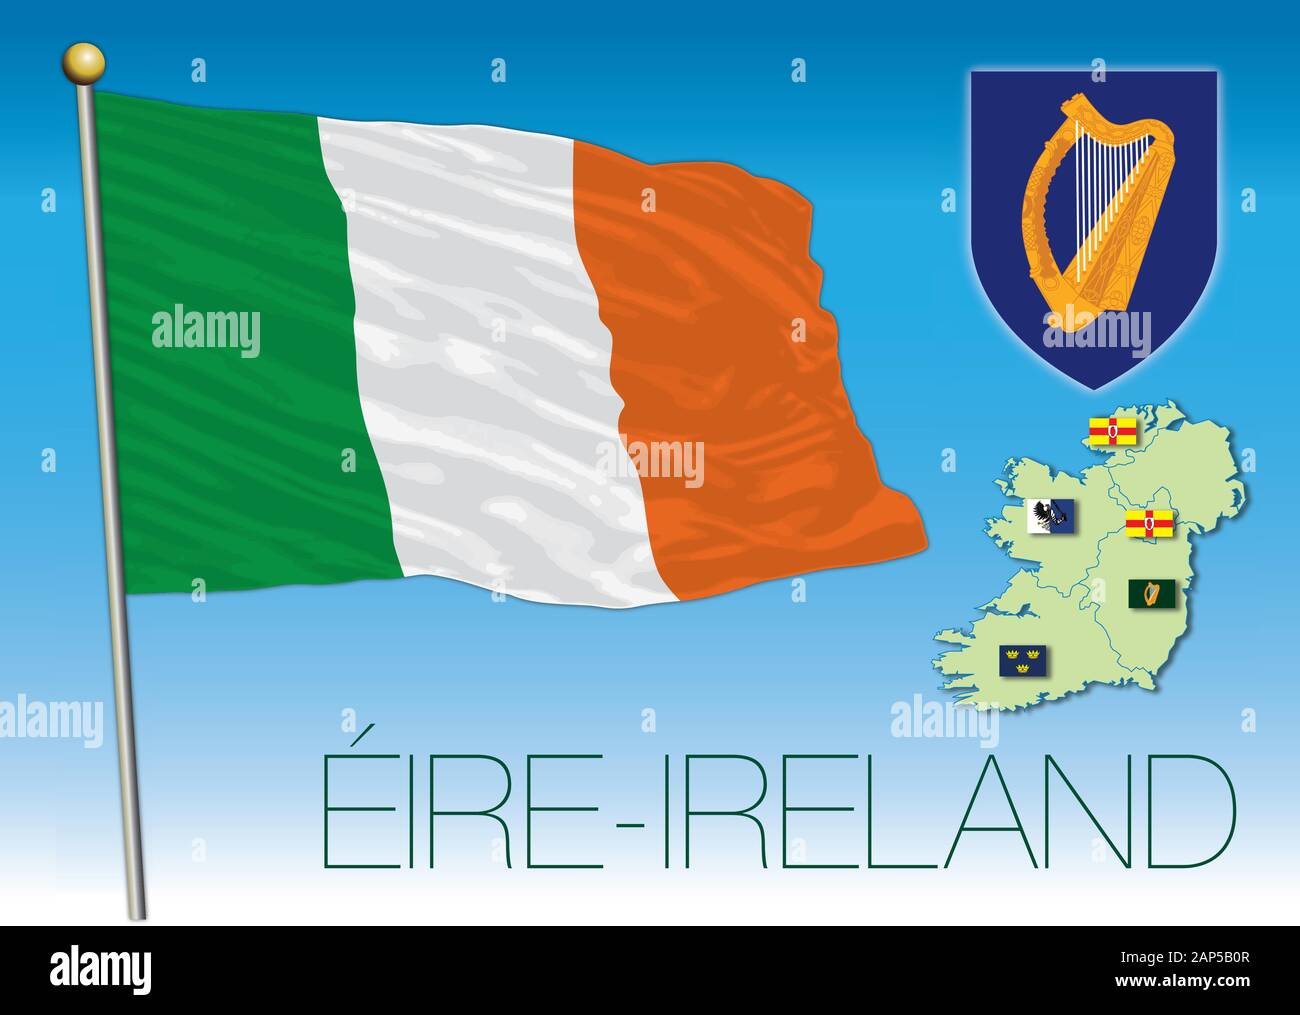 Eire Ireland official flag and coat of arms, European Union, vector illustration Stock Vector